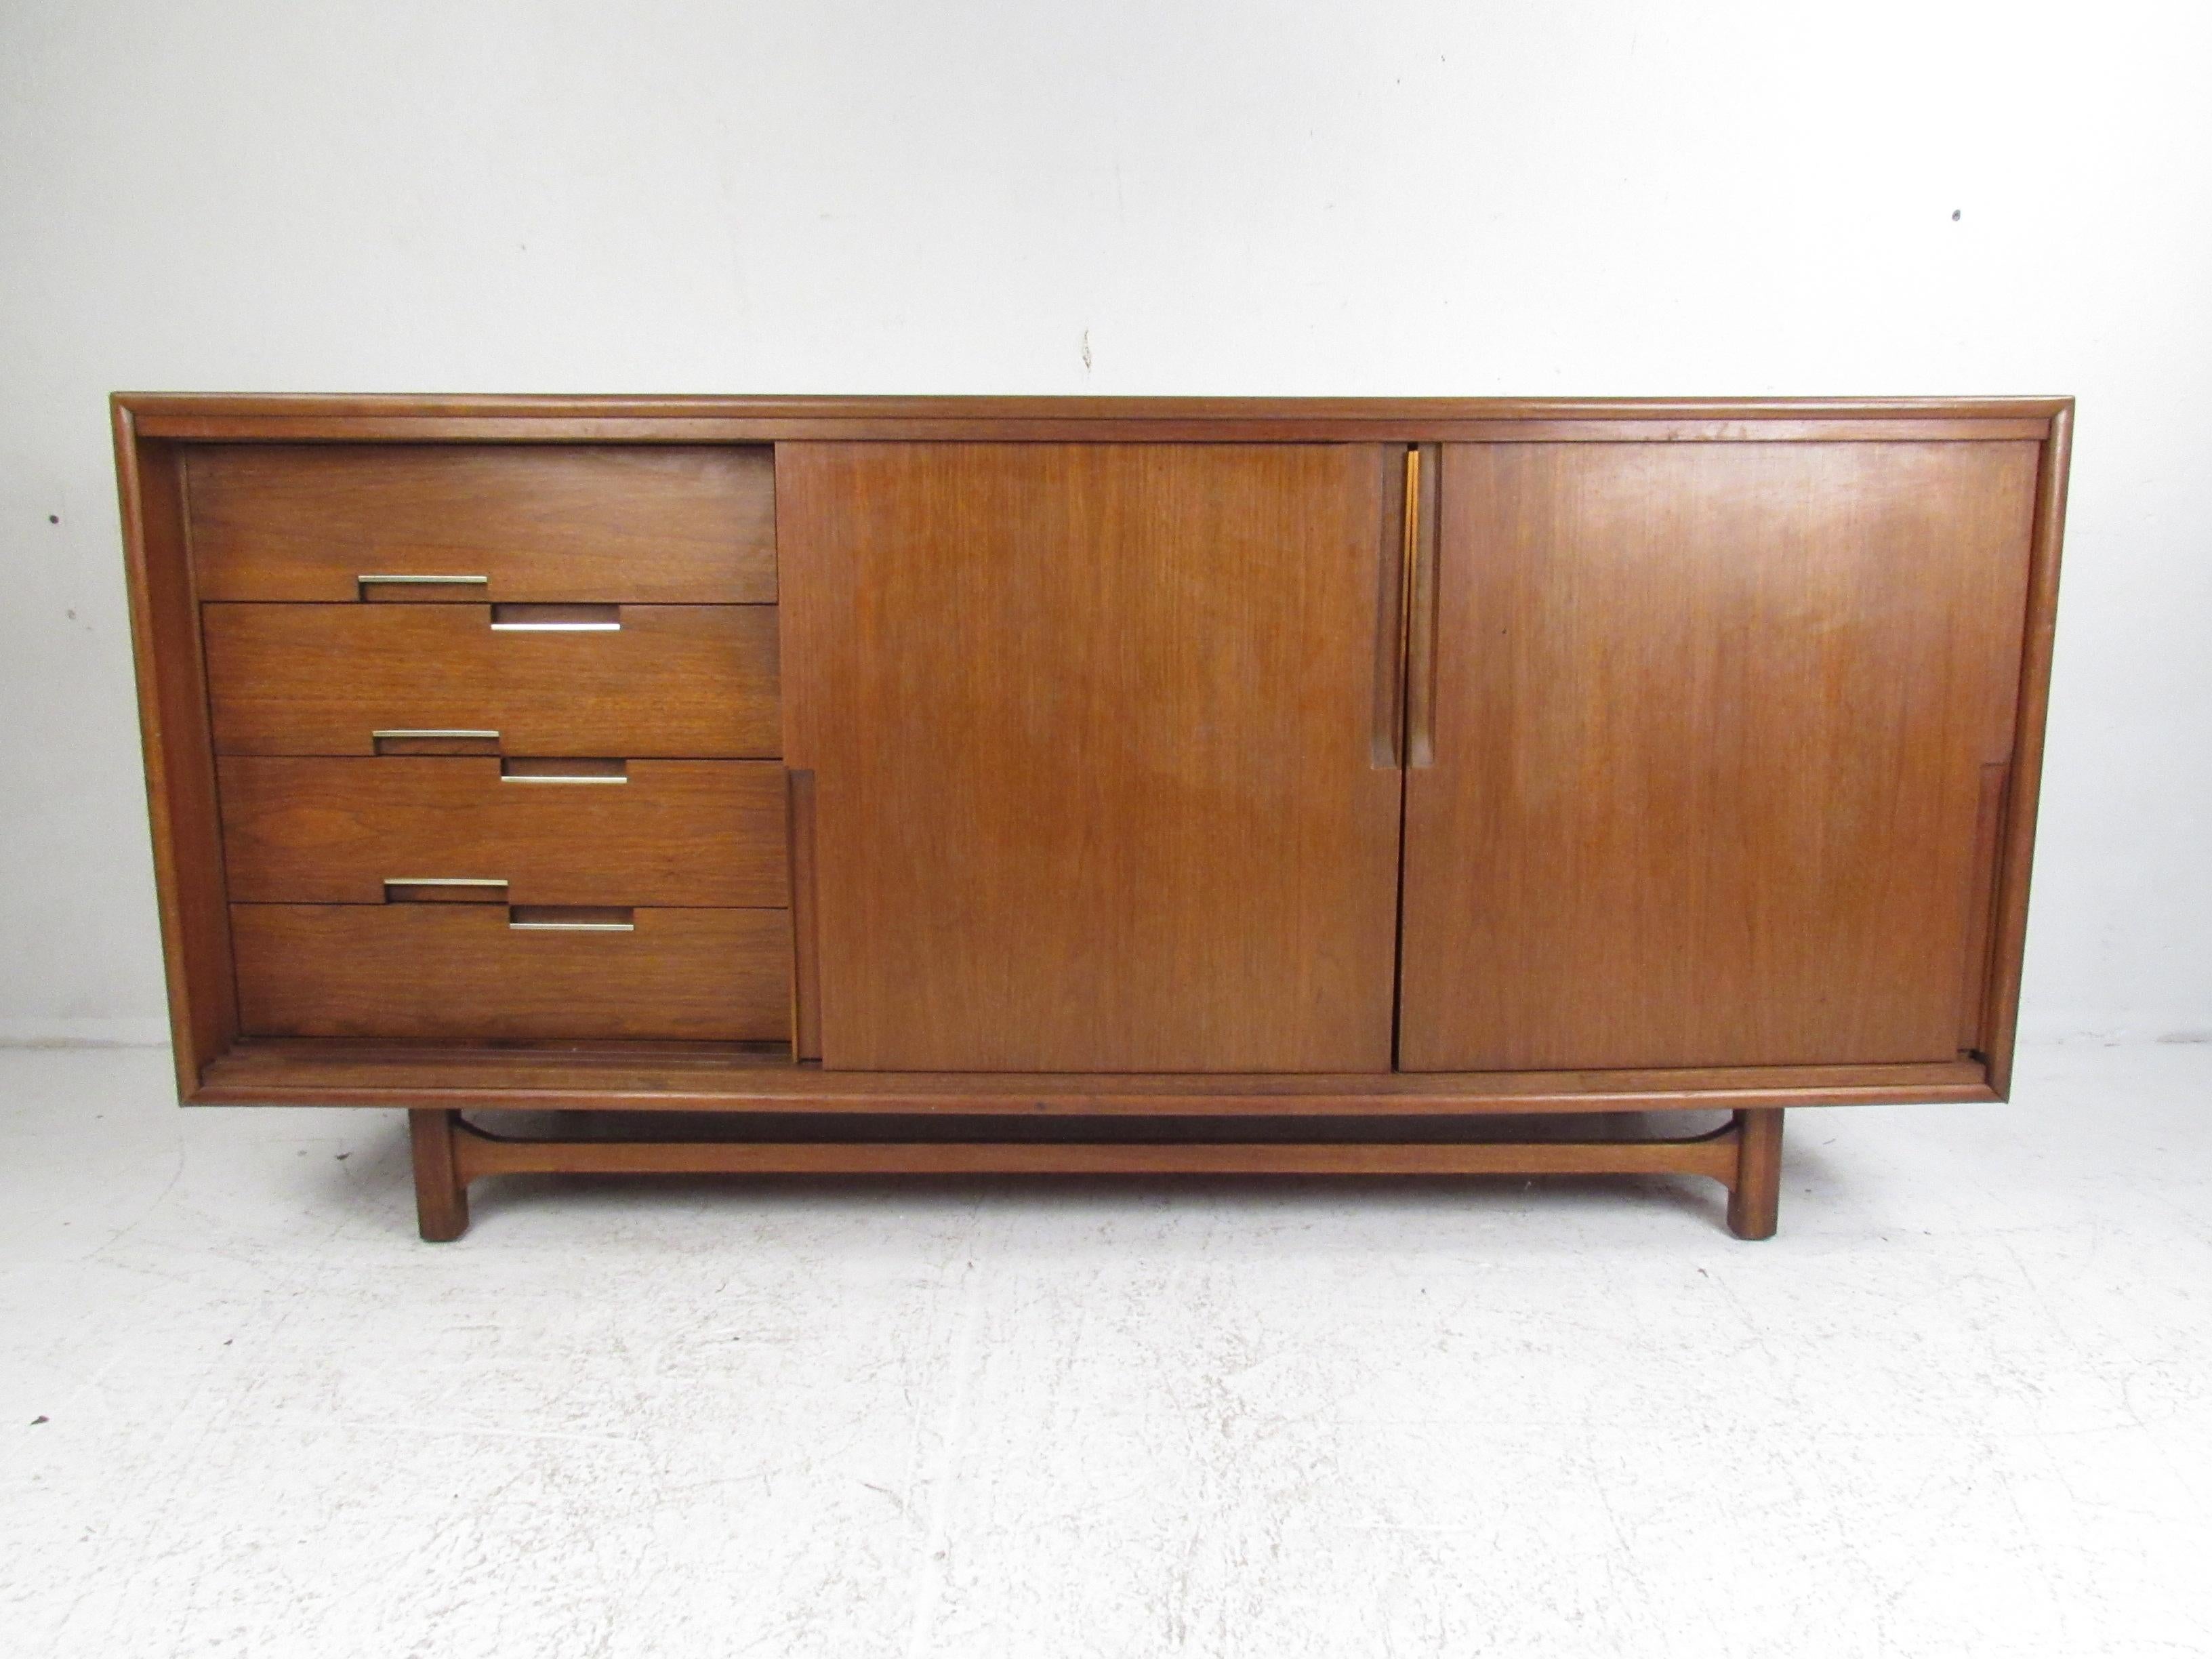 This attractive vintage modern walnut credenza features nine hefty drawers hidden by unique sliding doors. Sleek design with recessed drawer pulls, dovetail joints, and a sculpted stretcher along the base. Quality construction on display that offers